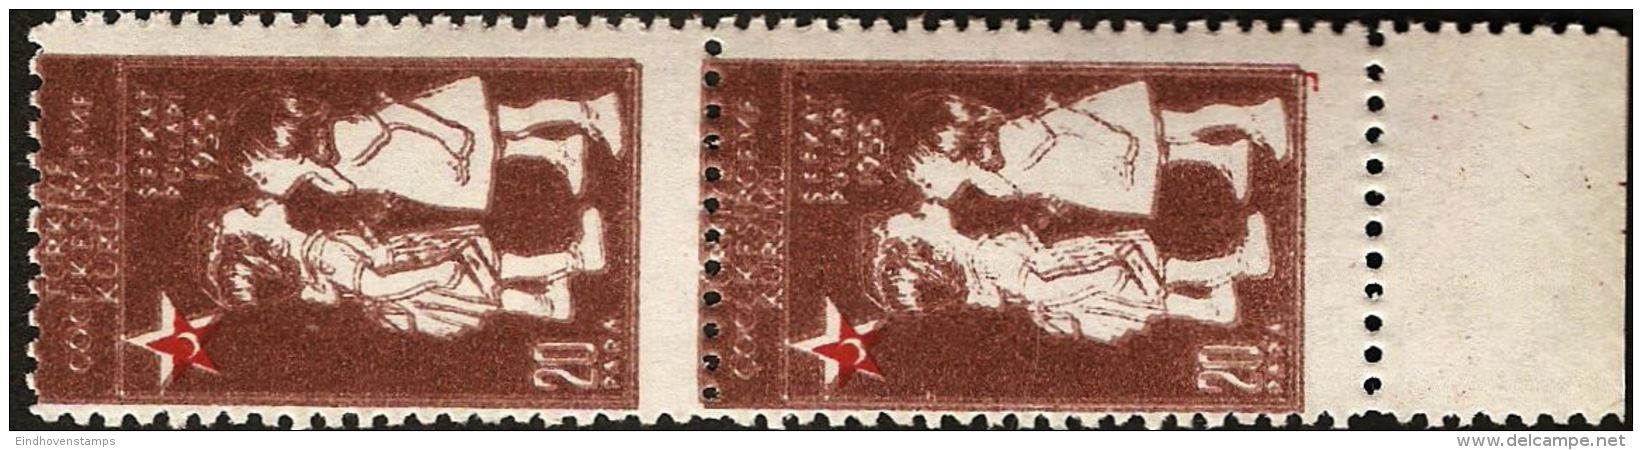 Turkey 1955 20 P Brown- Brown, Half Crescent Welfare Pair, Single Set-off Brown Print On Back Chilld Care TW55-01b2 - Charity Stamps